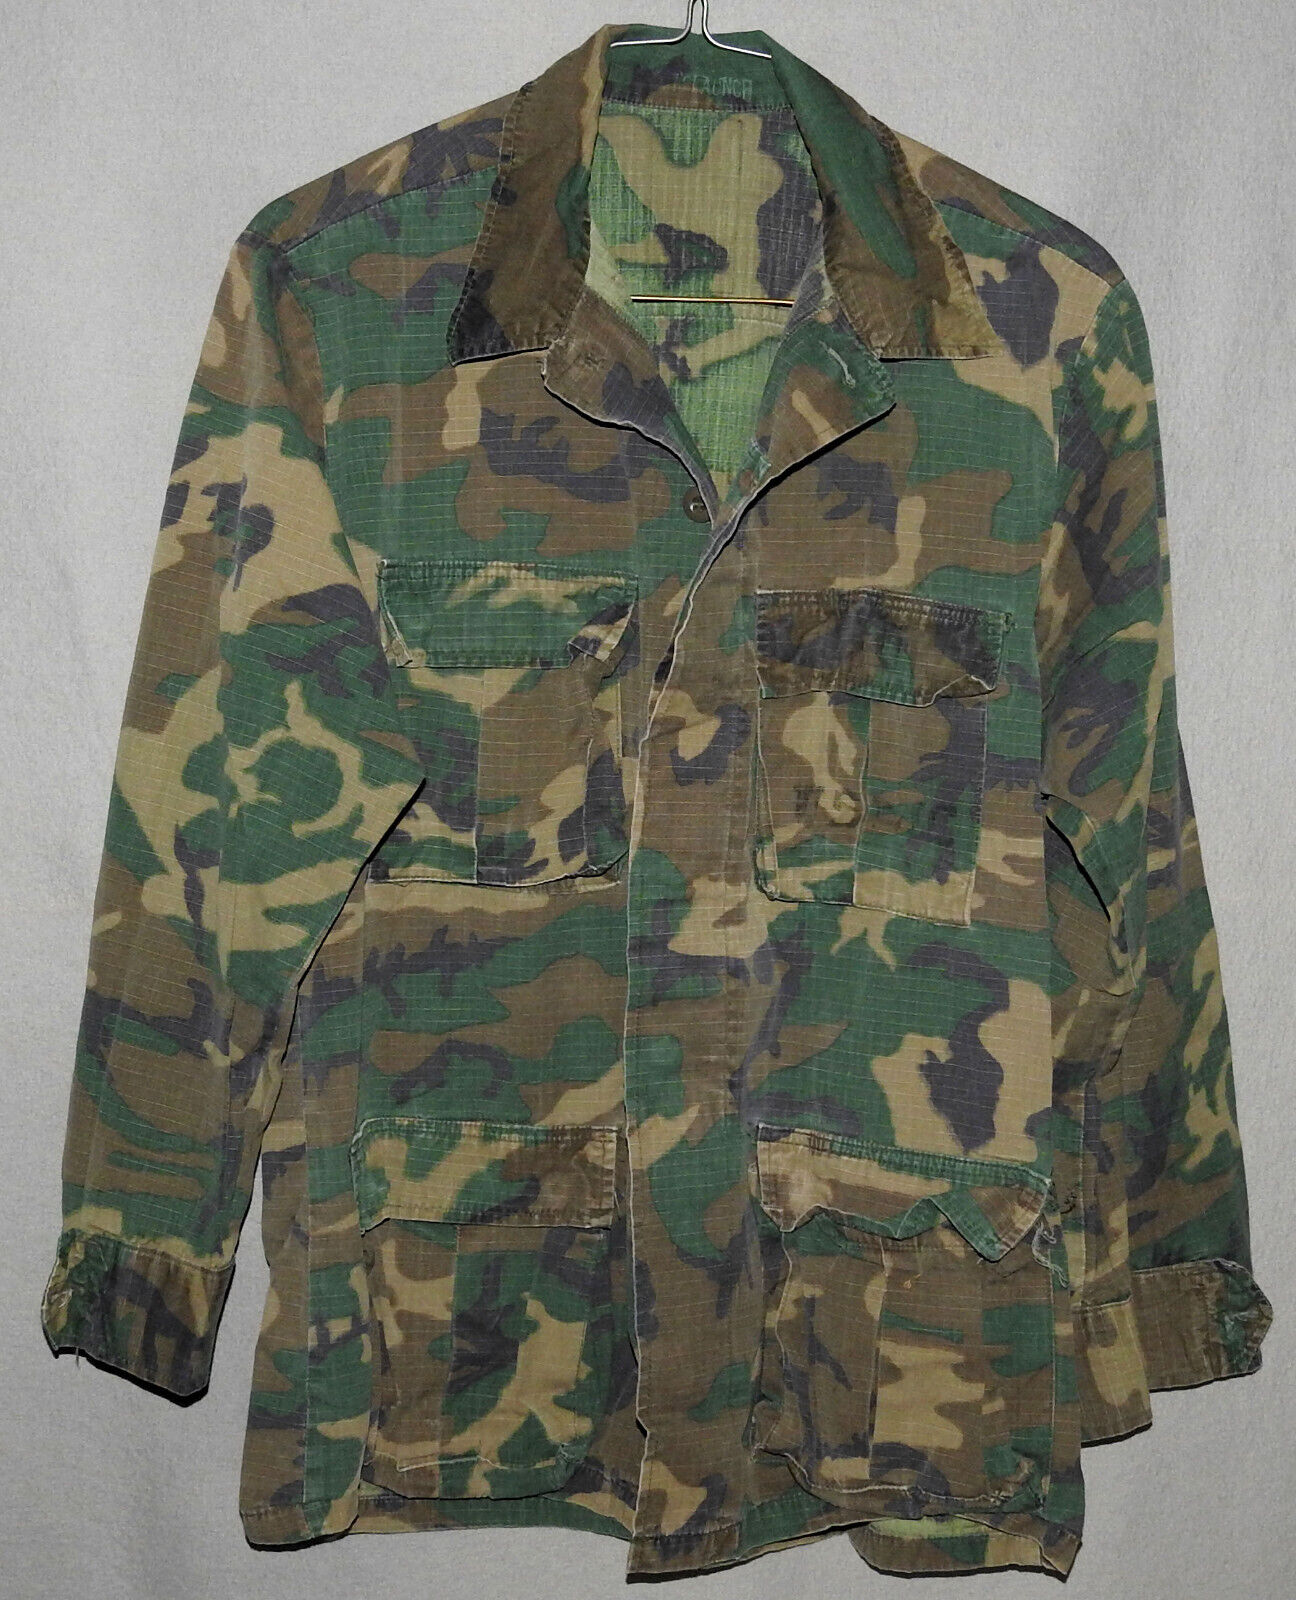 USMC Hot Weather Camouflage Coat 100% Cotton dated 1970s-1980s